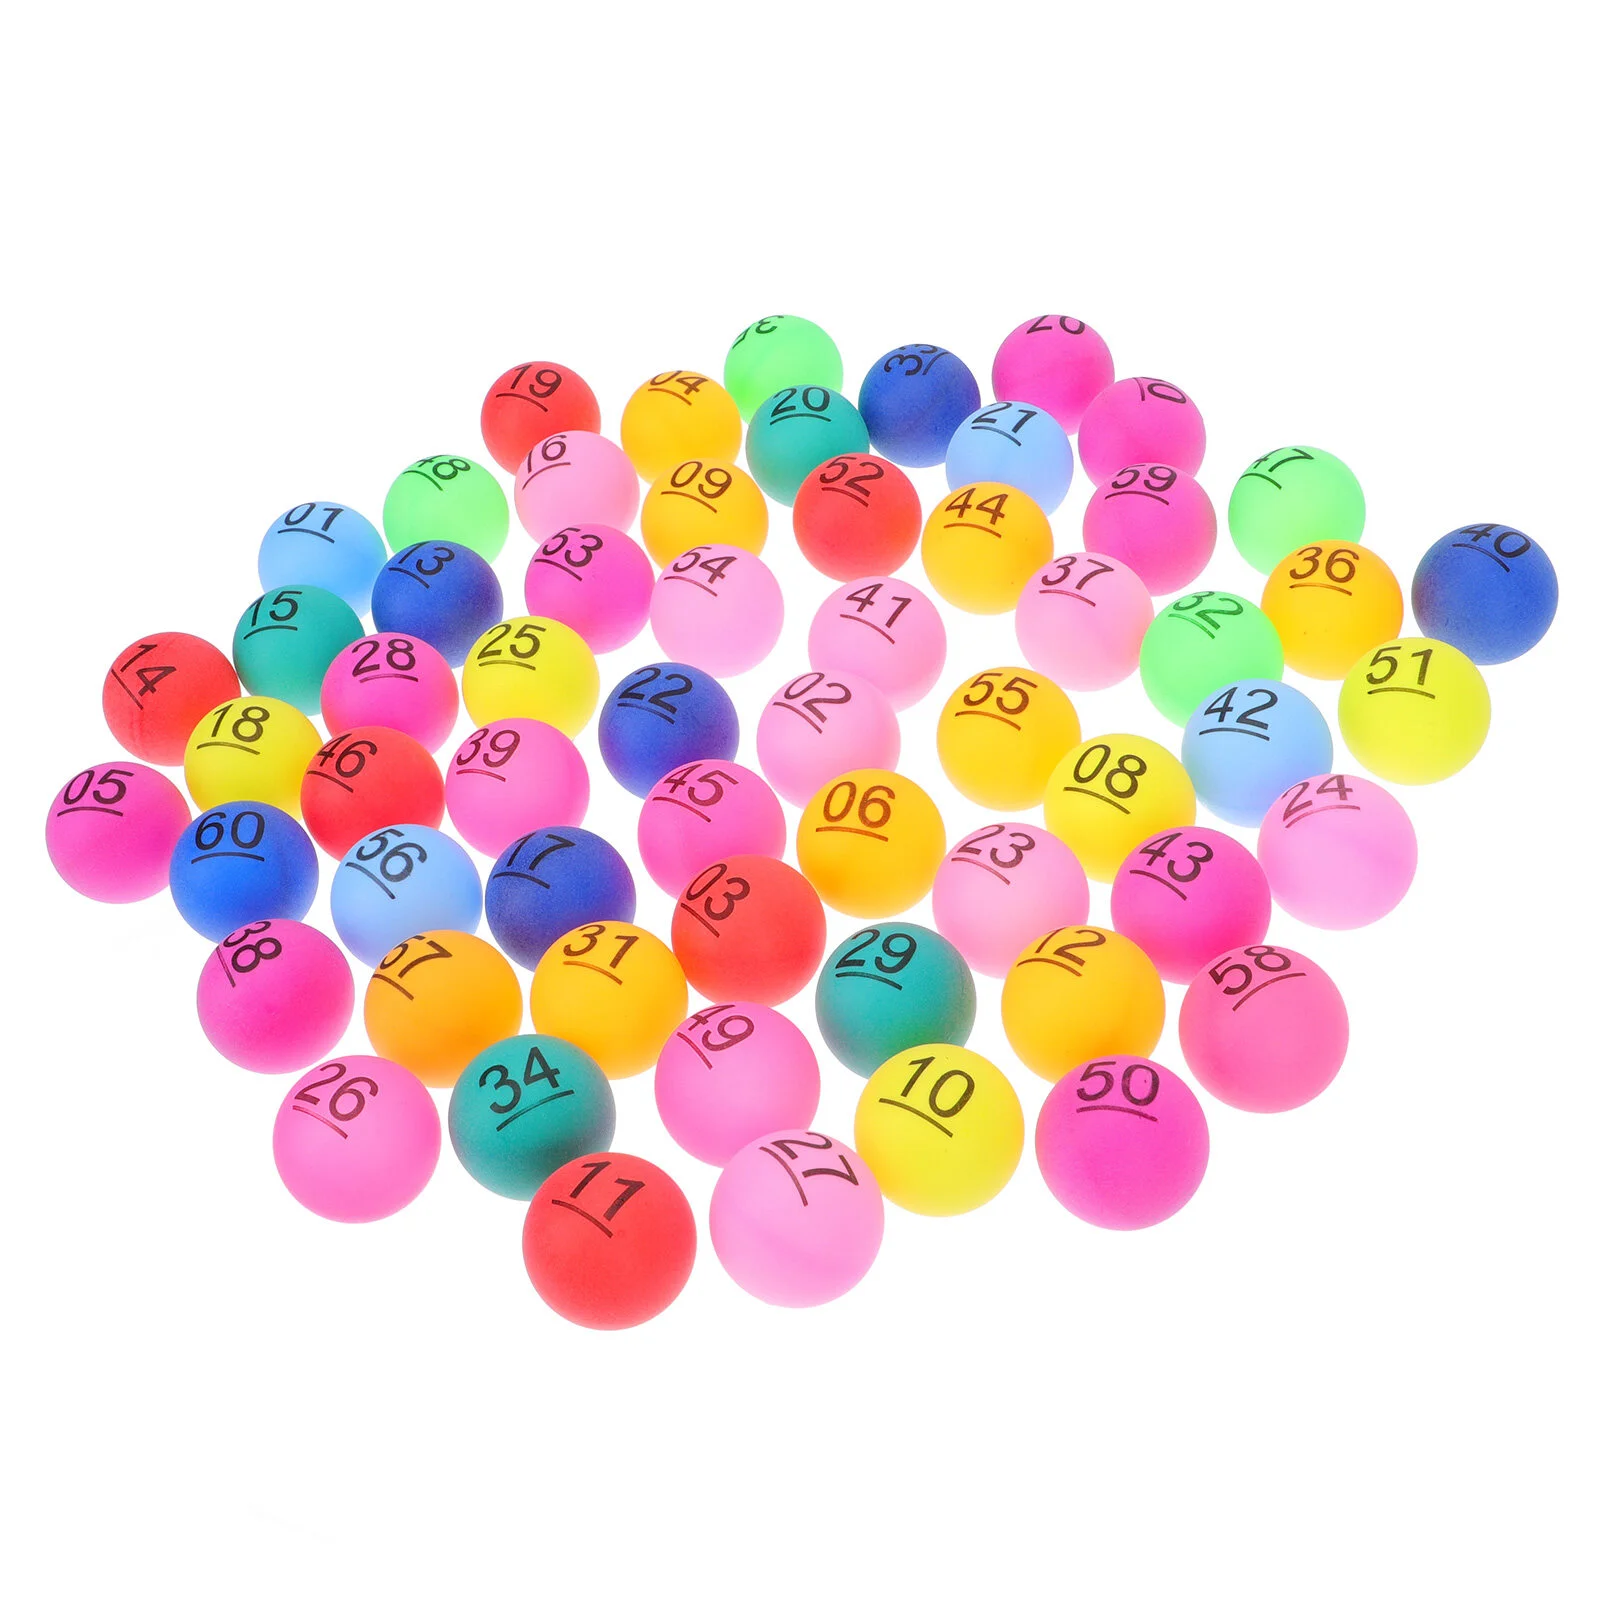 

60 PCS Beer Lottery Ball Number Balls Pong Seamless Game Beer Pong Balls Tennis Plastic Numbered Entertainment